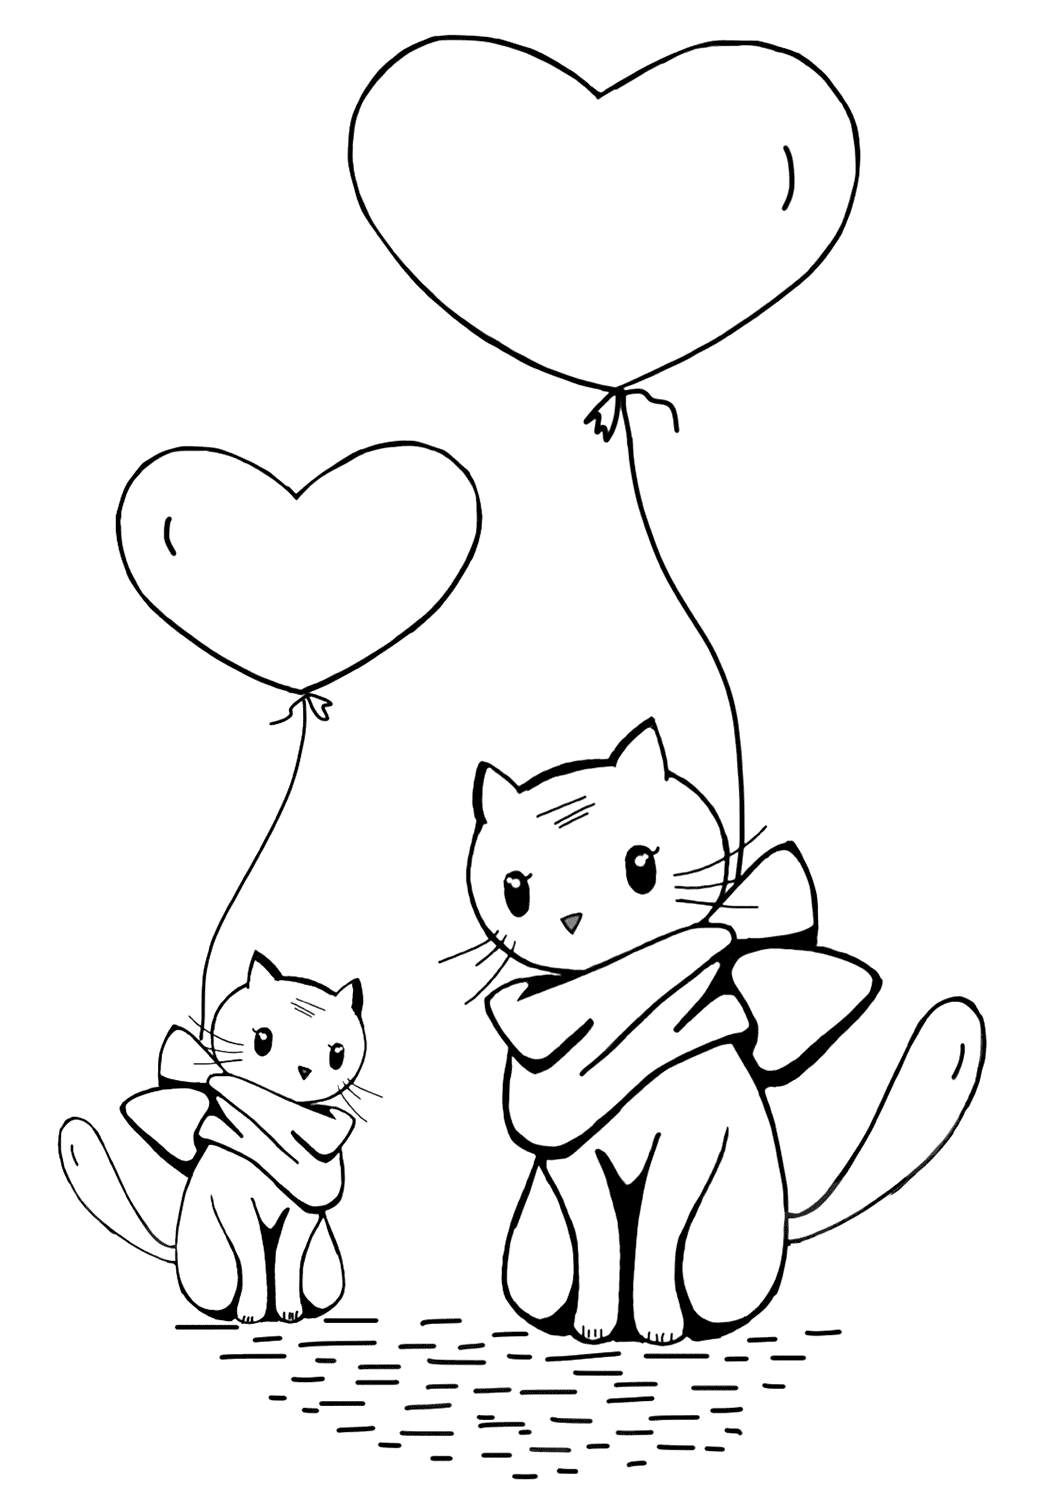 Cats With Heart Balloons Coloring Page